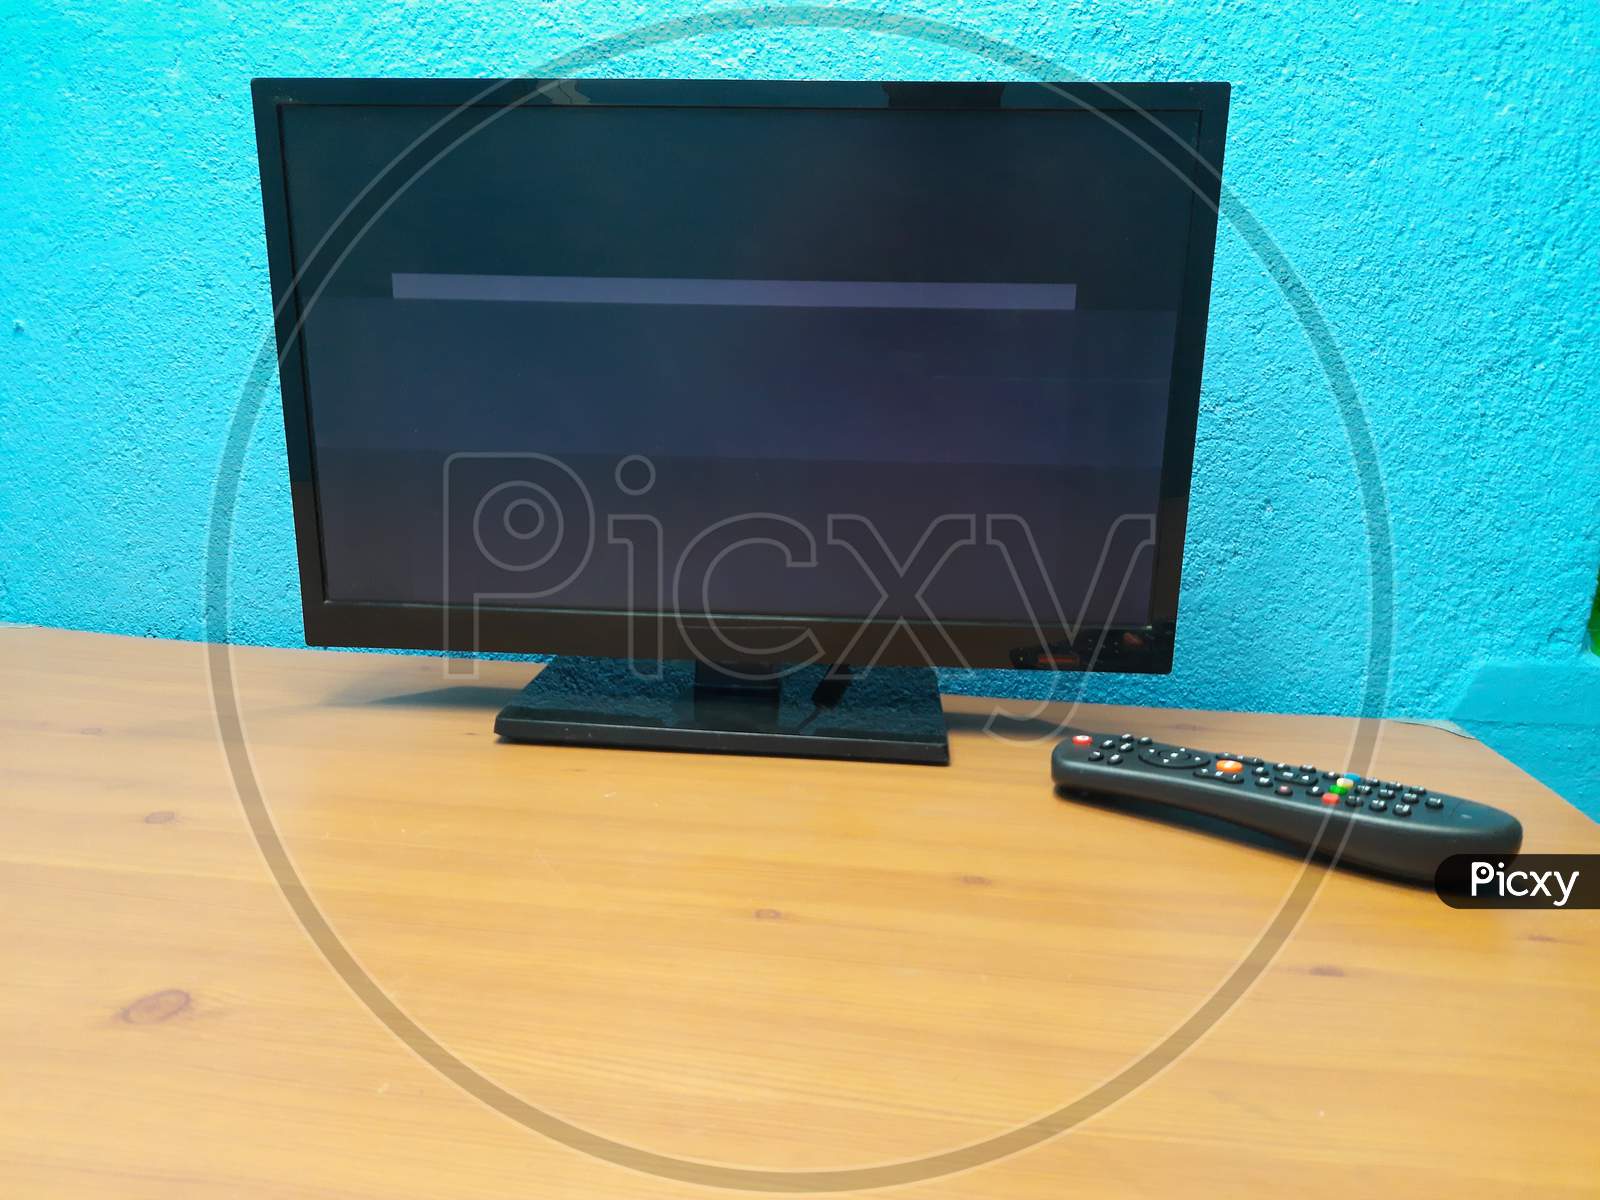 Led tv and Remote in table image, tv image, Selective Focus